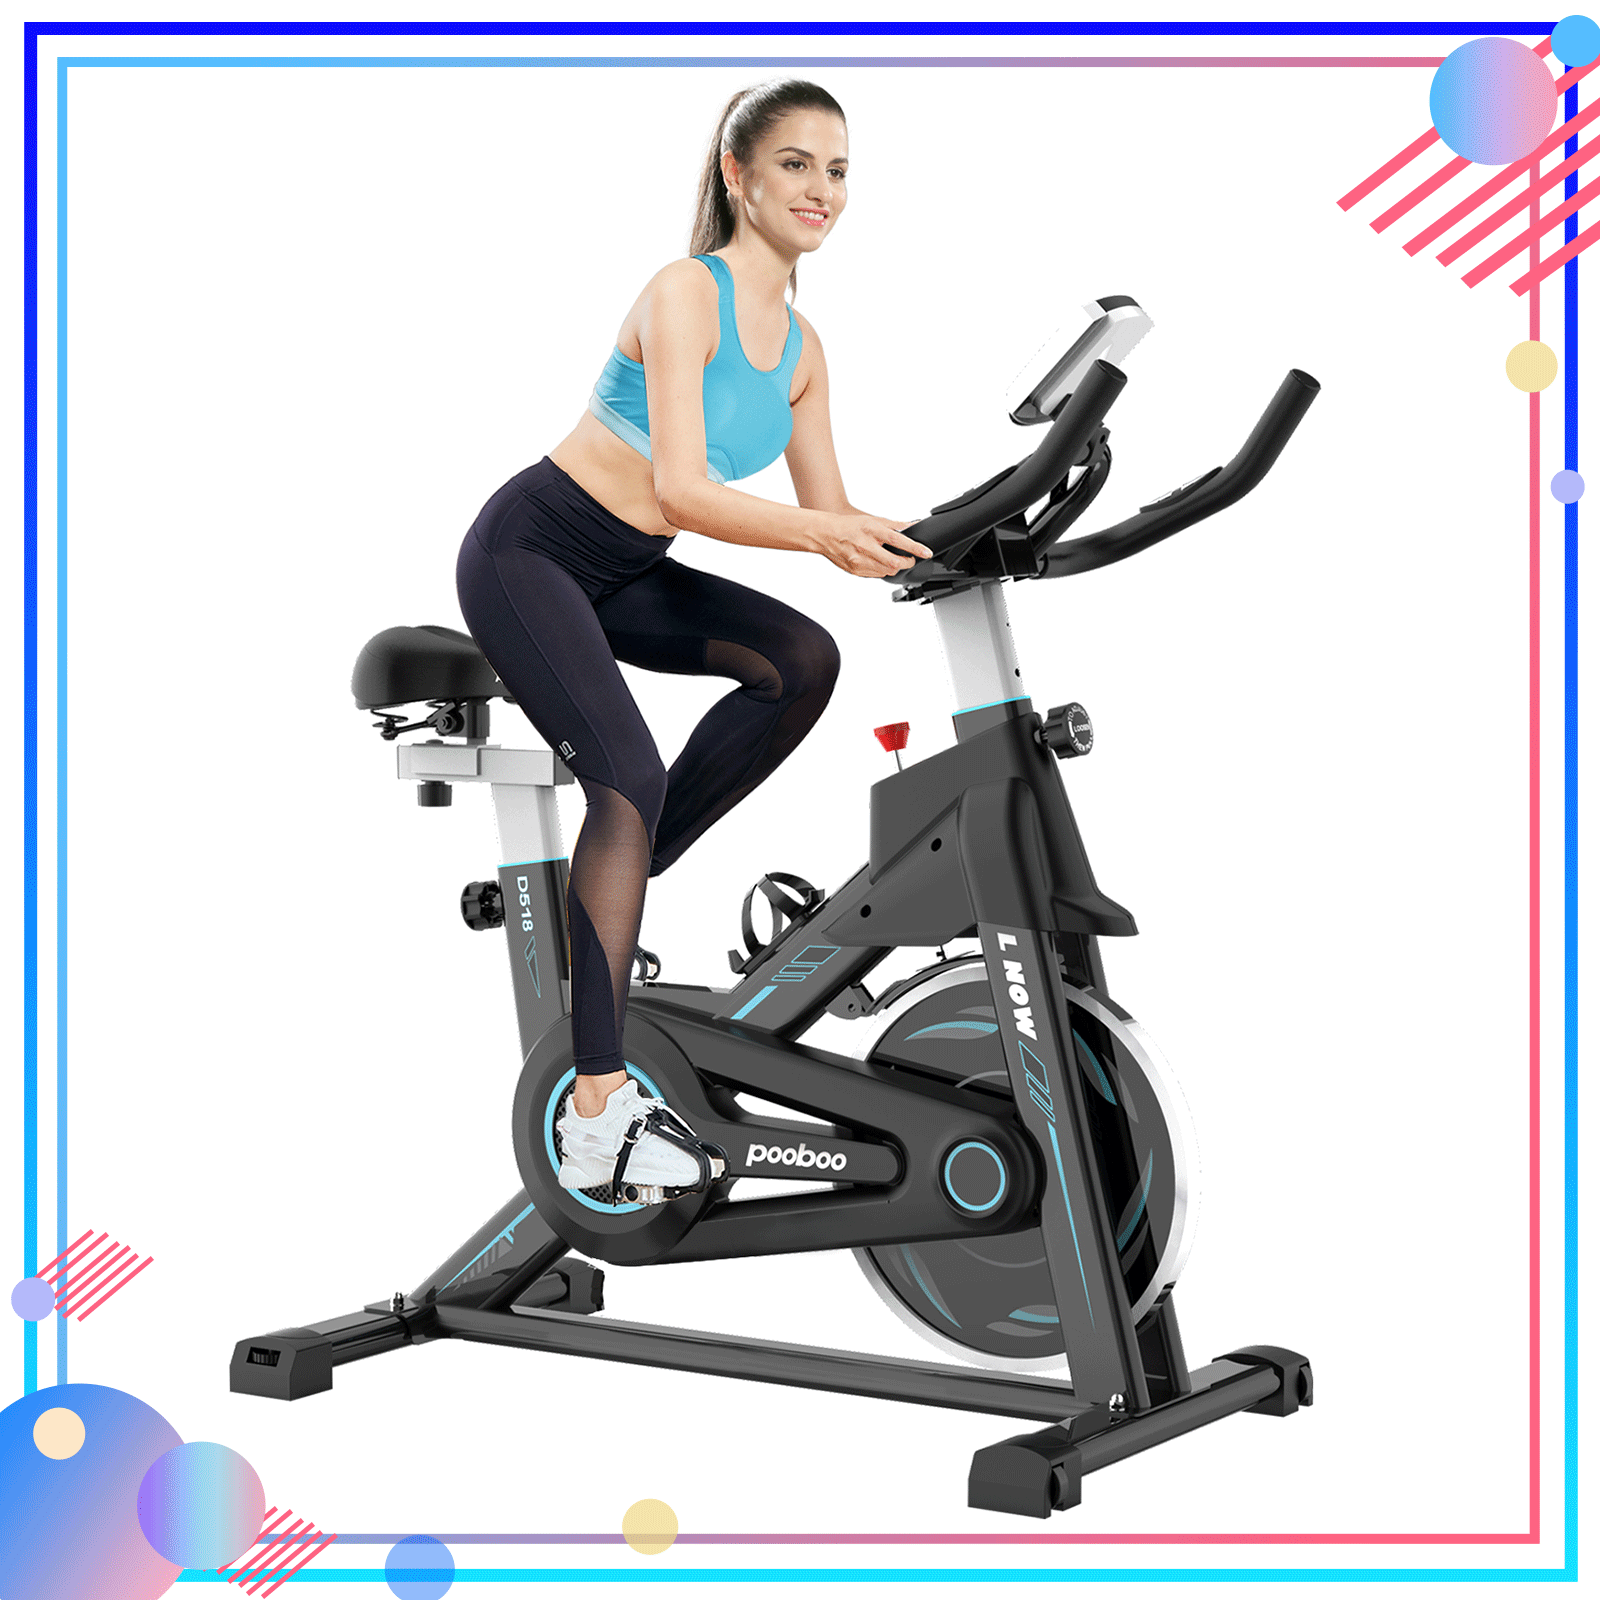 Details about   Cycling Bike Exercise Stationary Bike W/phone Mount Cardio Workout Home Indoor 